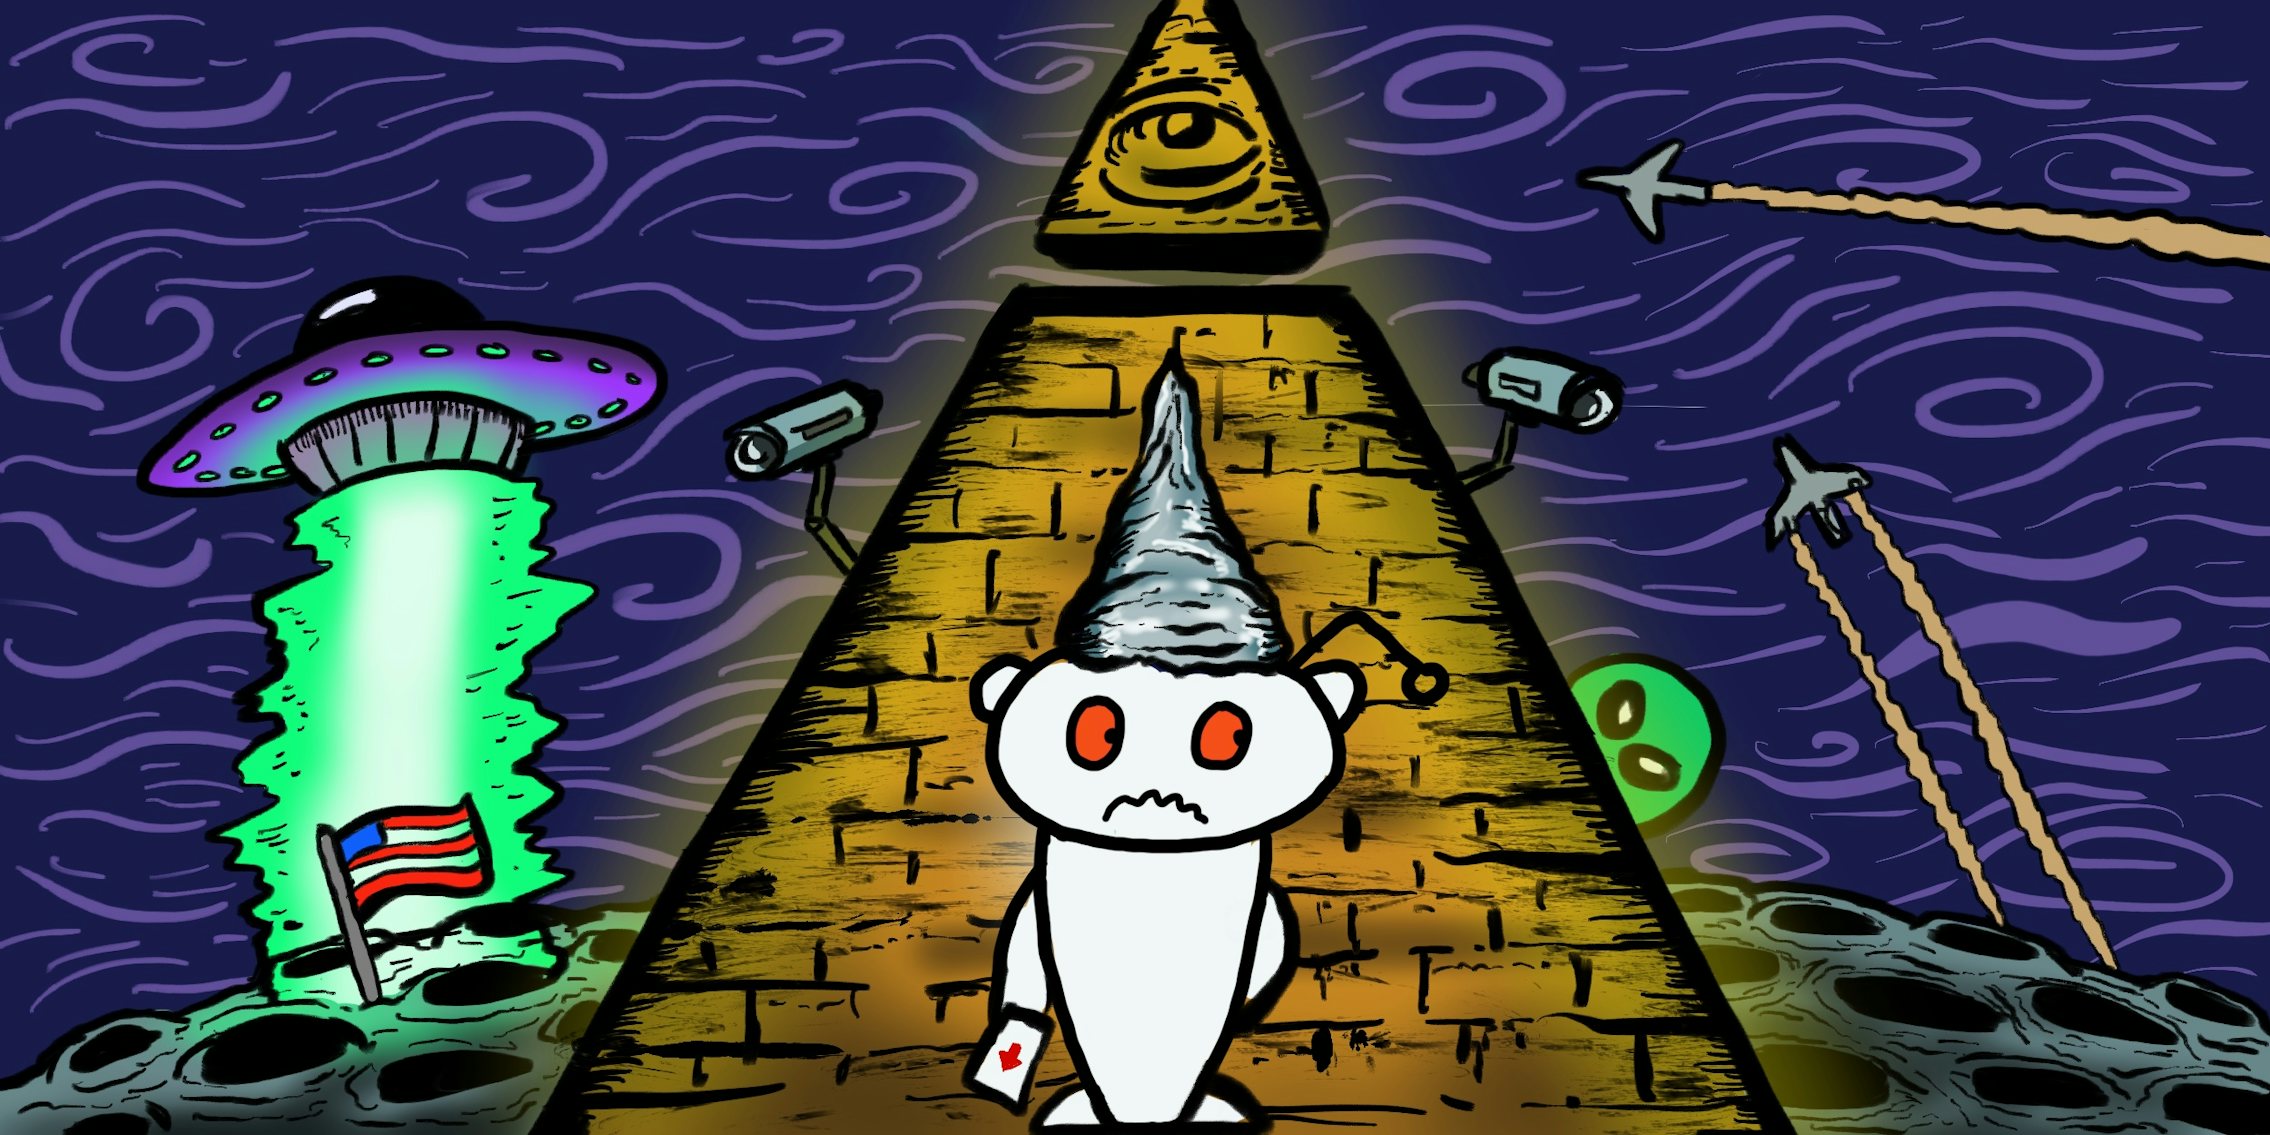 Reddit logo surrounded by popular conspiracy theory imagery